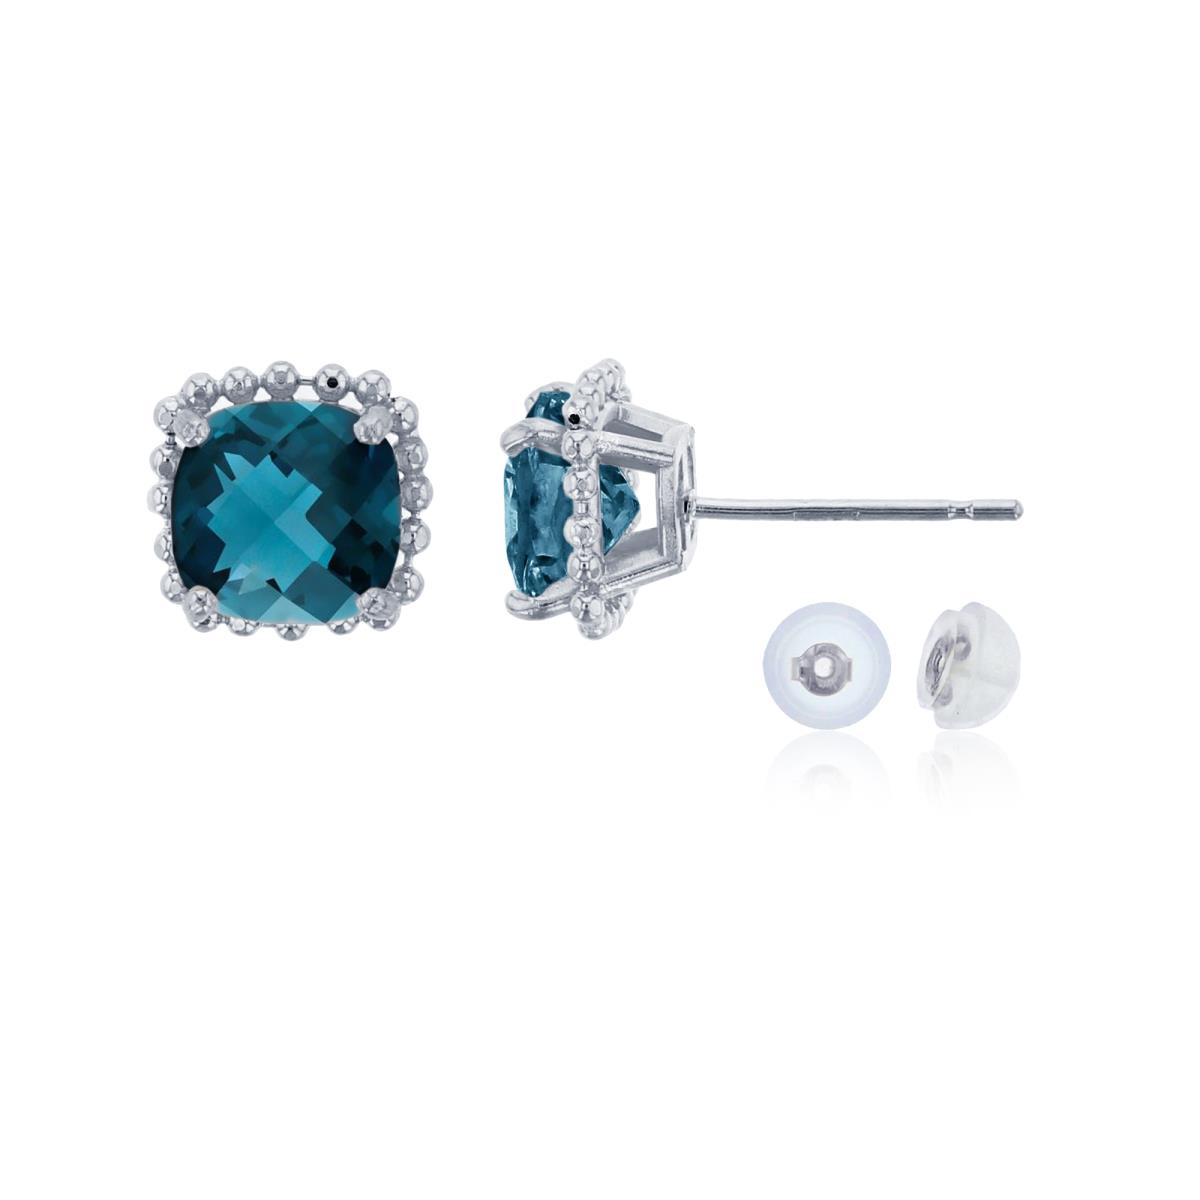 10K White Gold 6x6mm Cushion Cut London Blue Topaz Bead Frame Stud Earring with Silicone Back